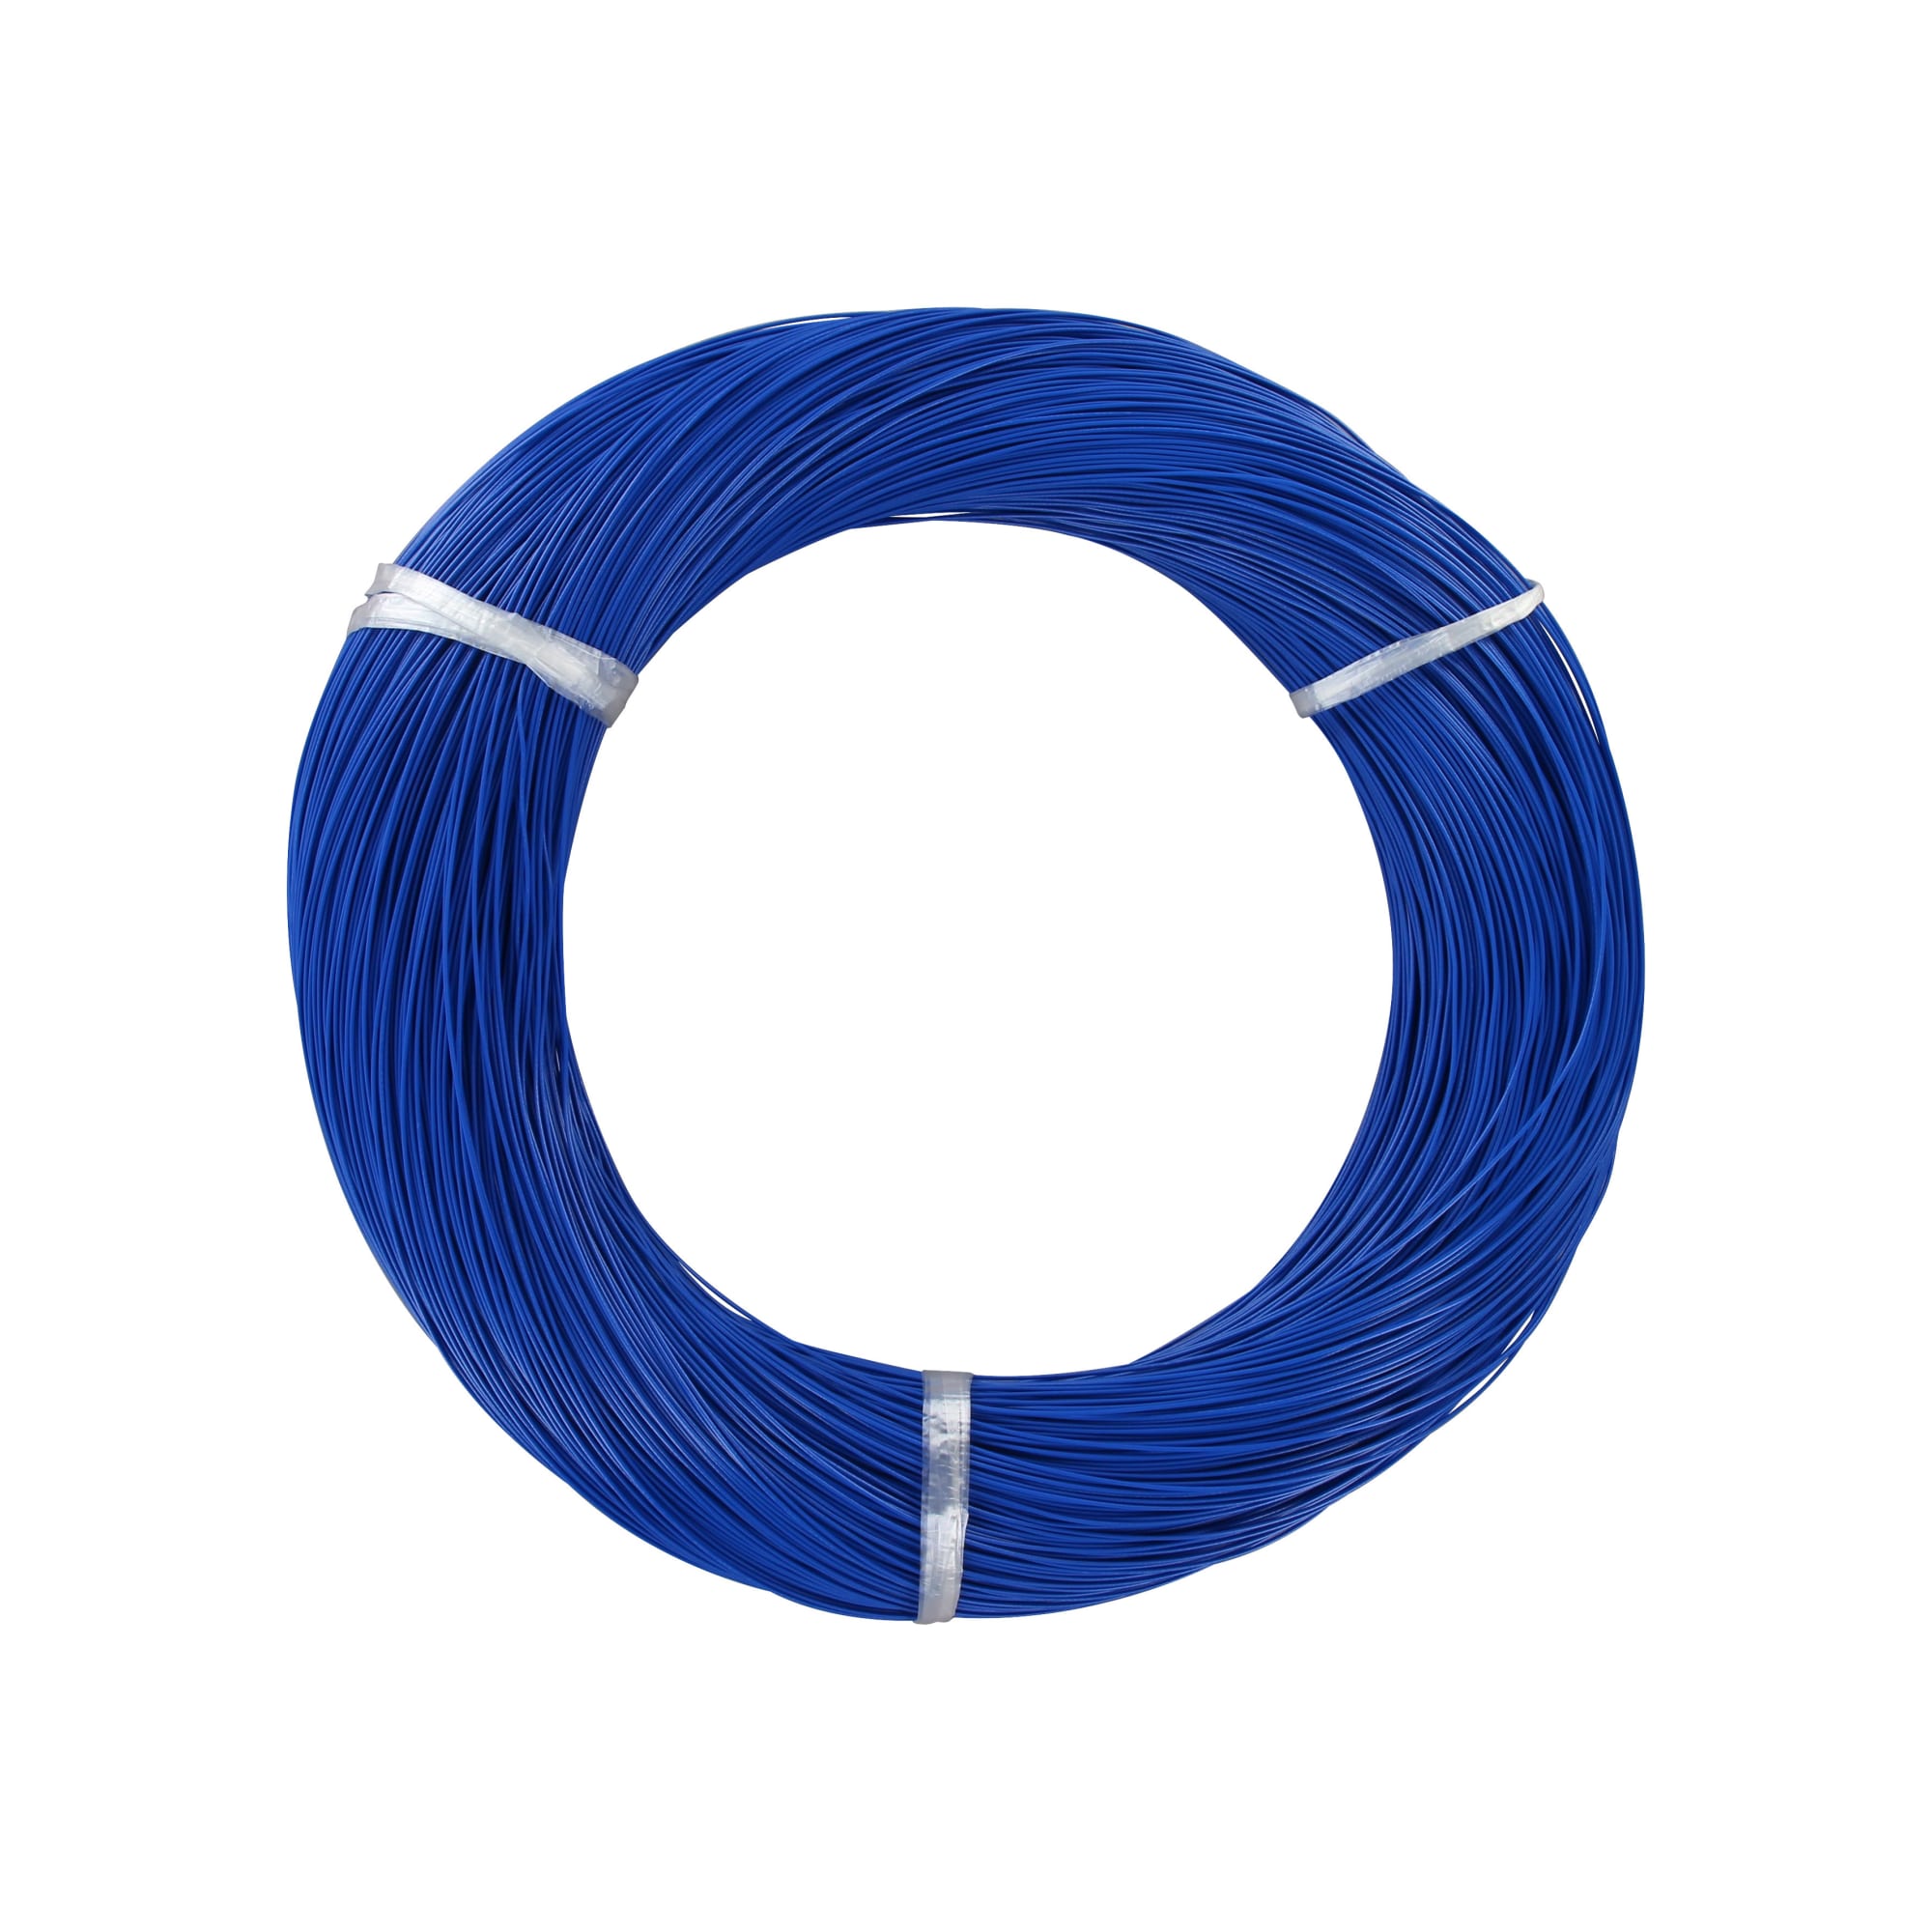 UL1061 AWG24-BE-610, Hook-Up Wires - Semi-Rigid, PVC, UL1061 Standard, Hitachi Cable